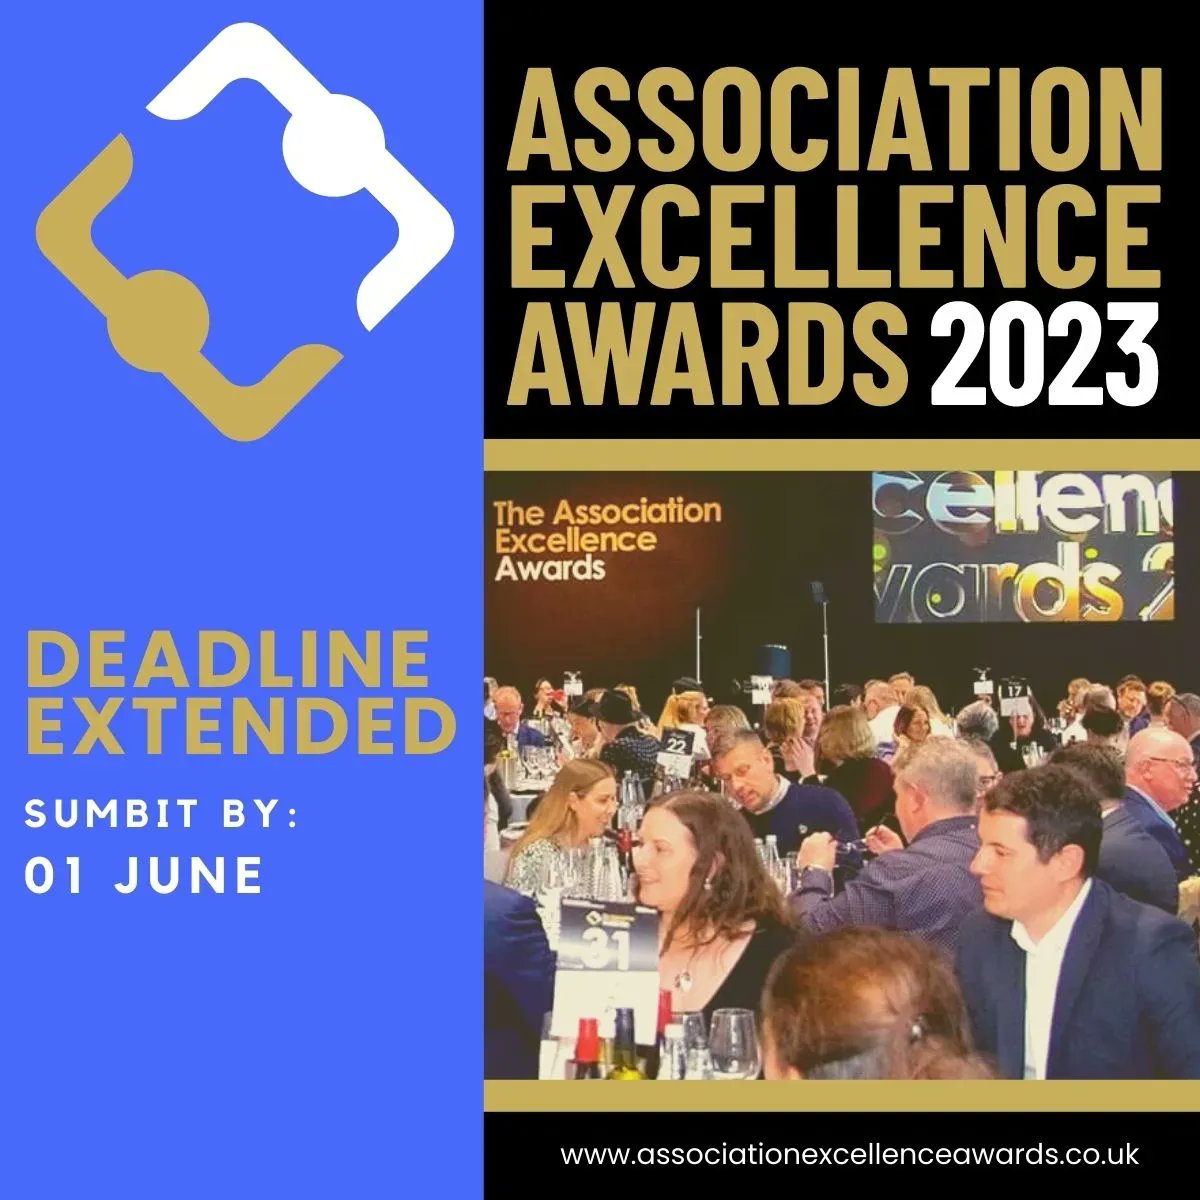 There's just over a week until the extended deadline for the Association Excellence Awards - still enough time to enter your association, trade body, professional organisation, or chartered institute!
▶️ bit.ly/3o1AyiP 
#AssociationExcellence